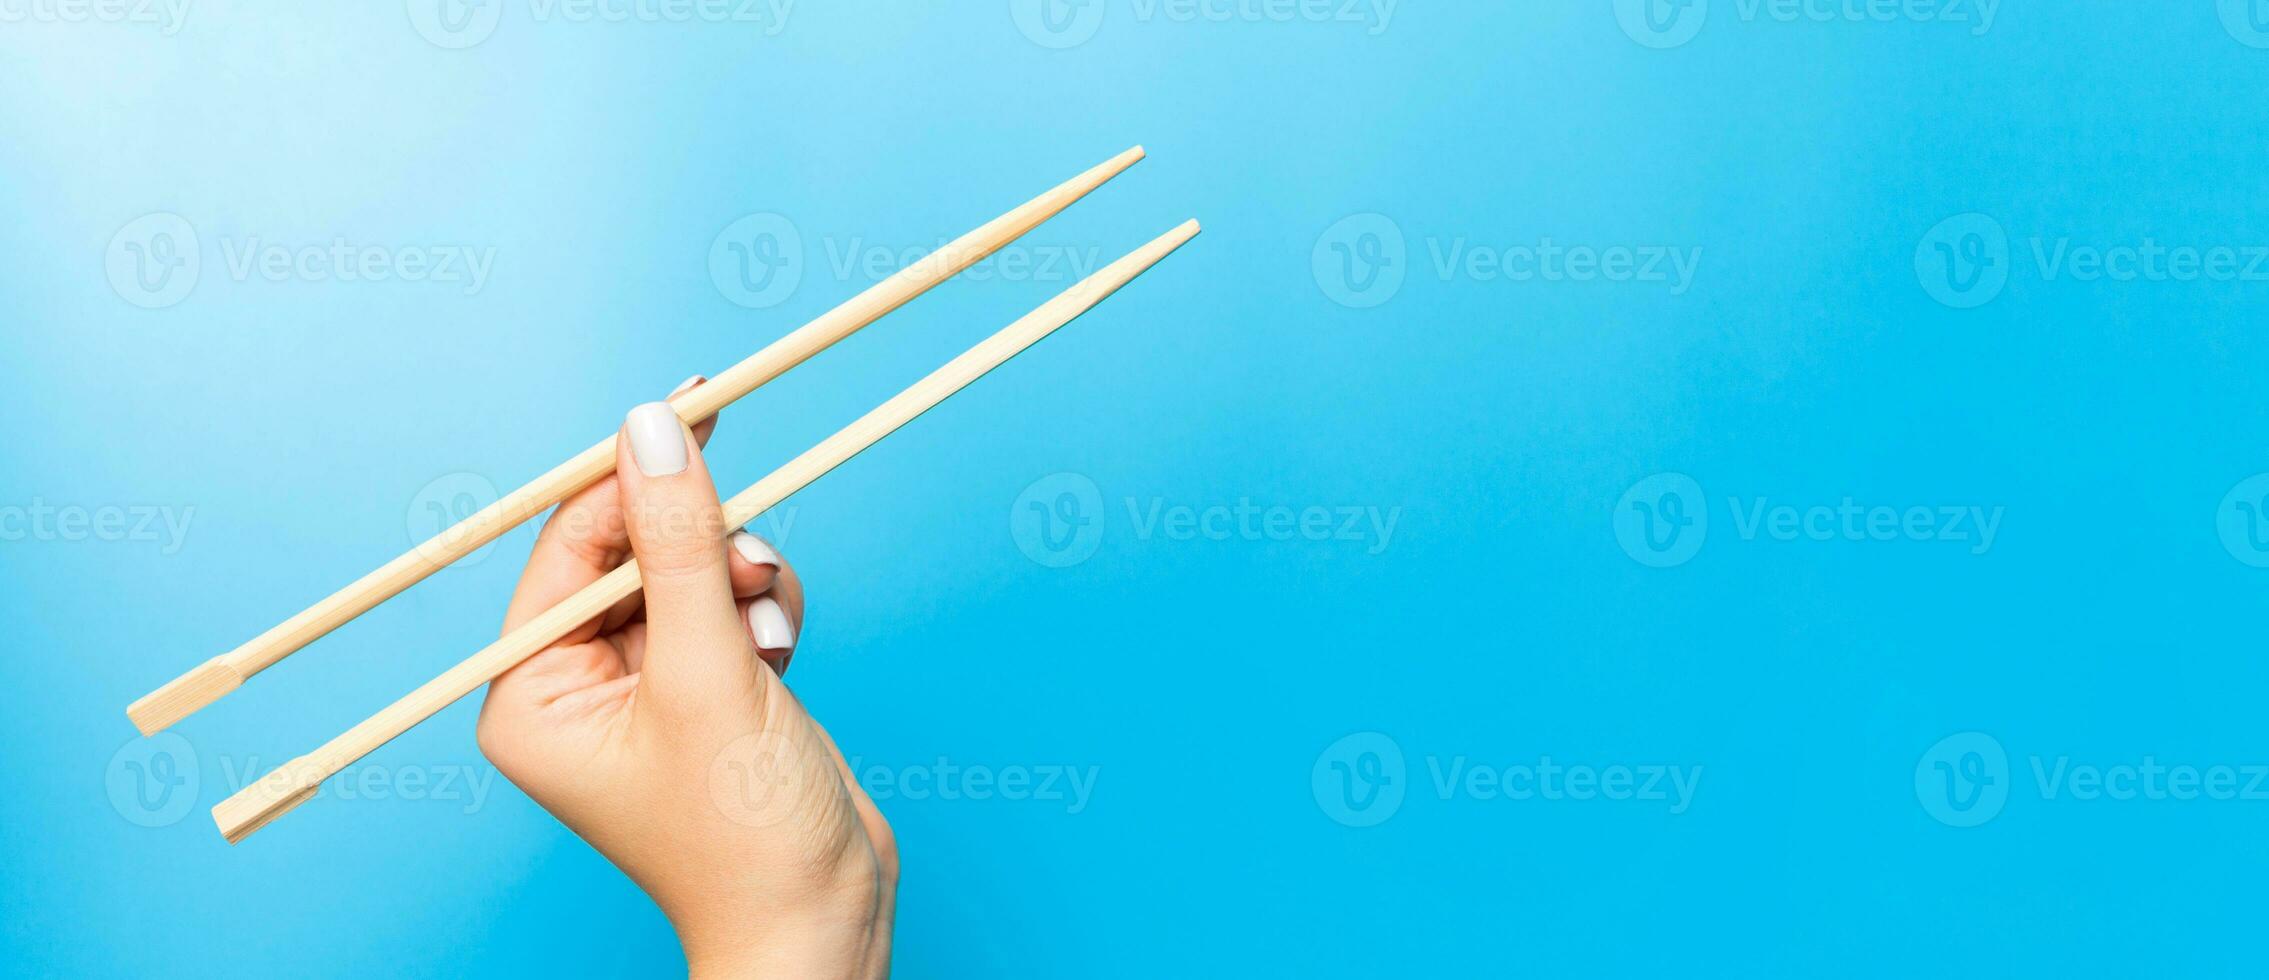 Wooden chopsticks holded with female hands on blue background. Ready for eating concepts with empty space photo